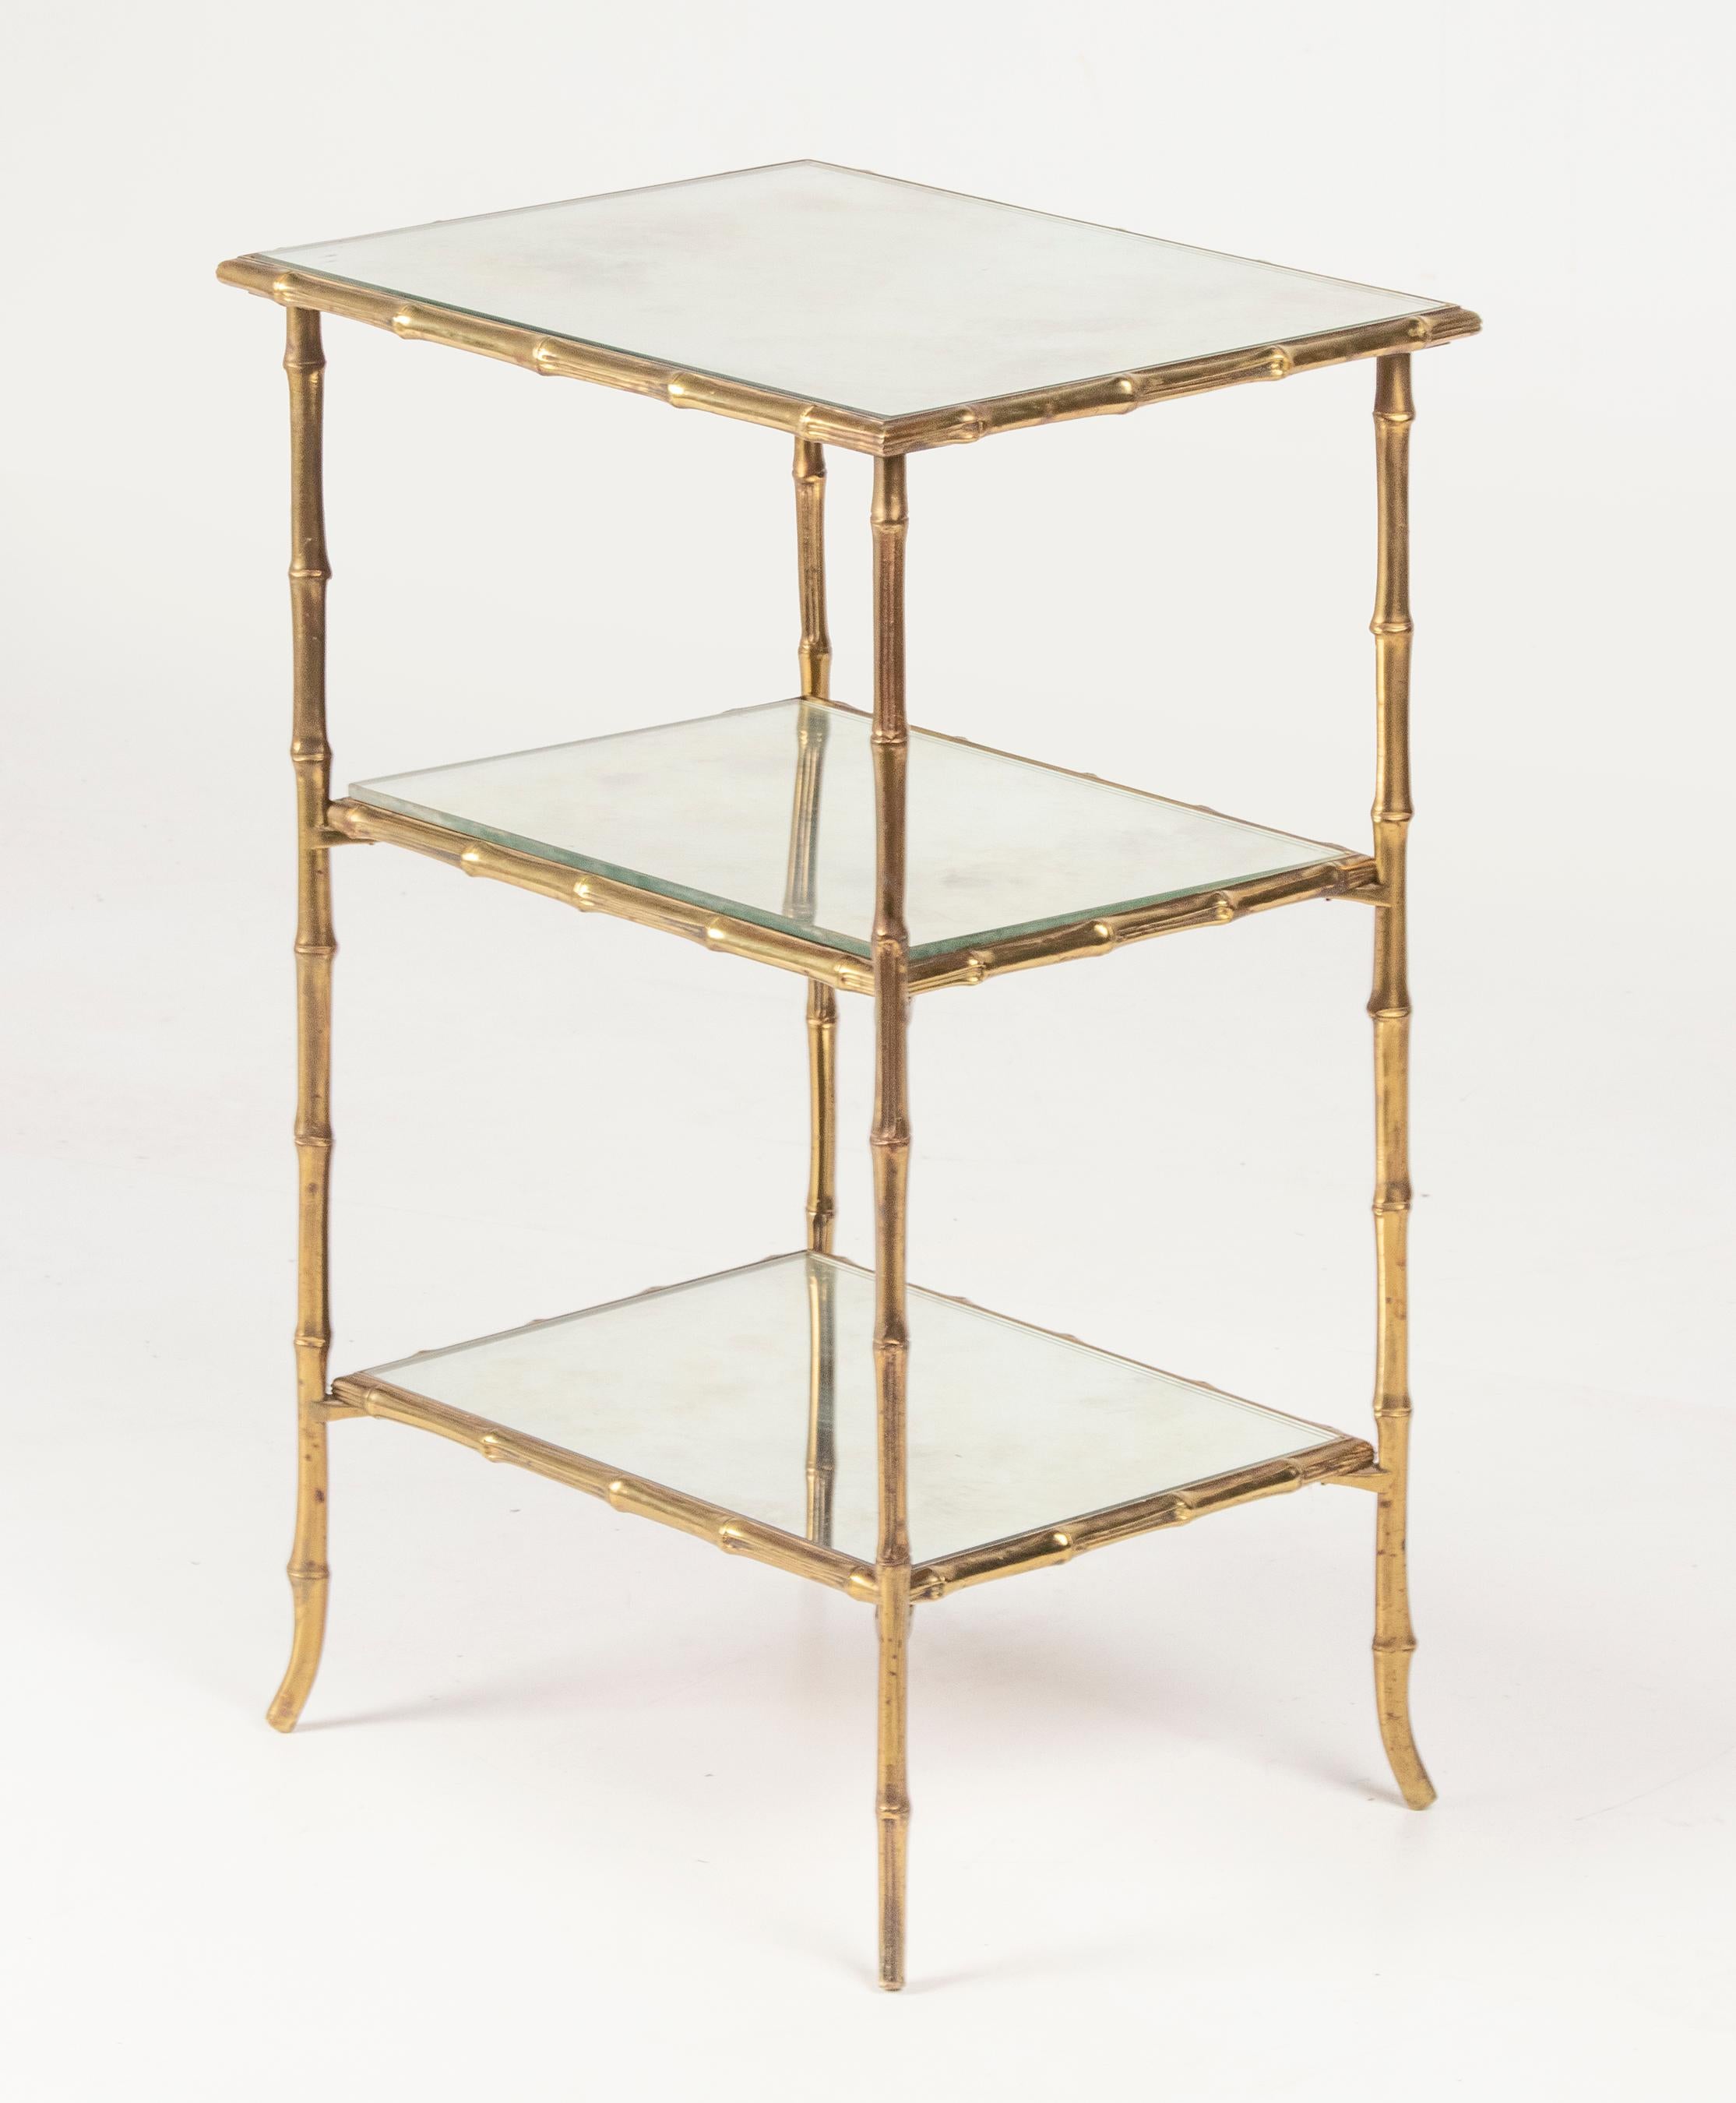 A stylish solid brass side table attributed to Maison Baguès. The frame is made of solid brass in faux bamboo with tapered legs at the endings. The brass have the original patina. The mirror glass tops have some wear, during aging, but this gives